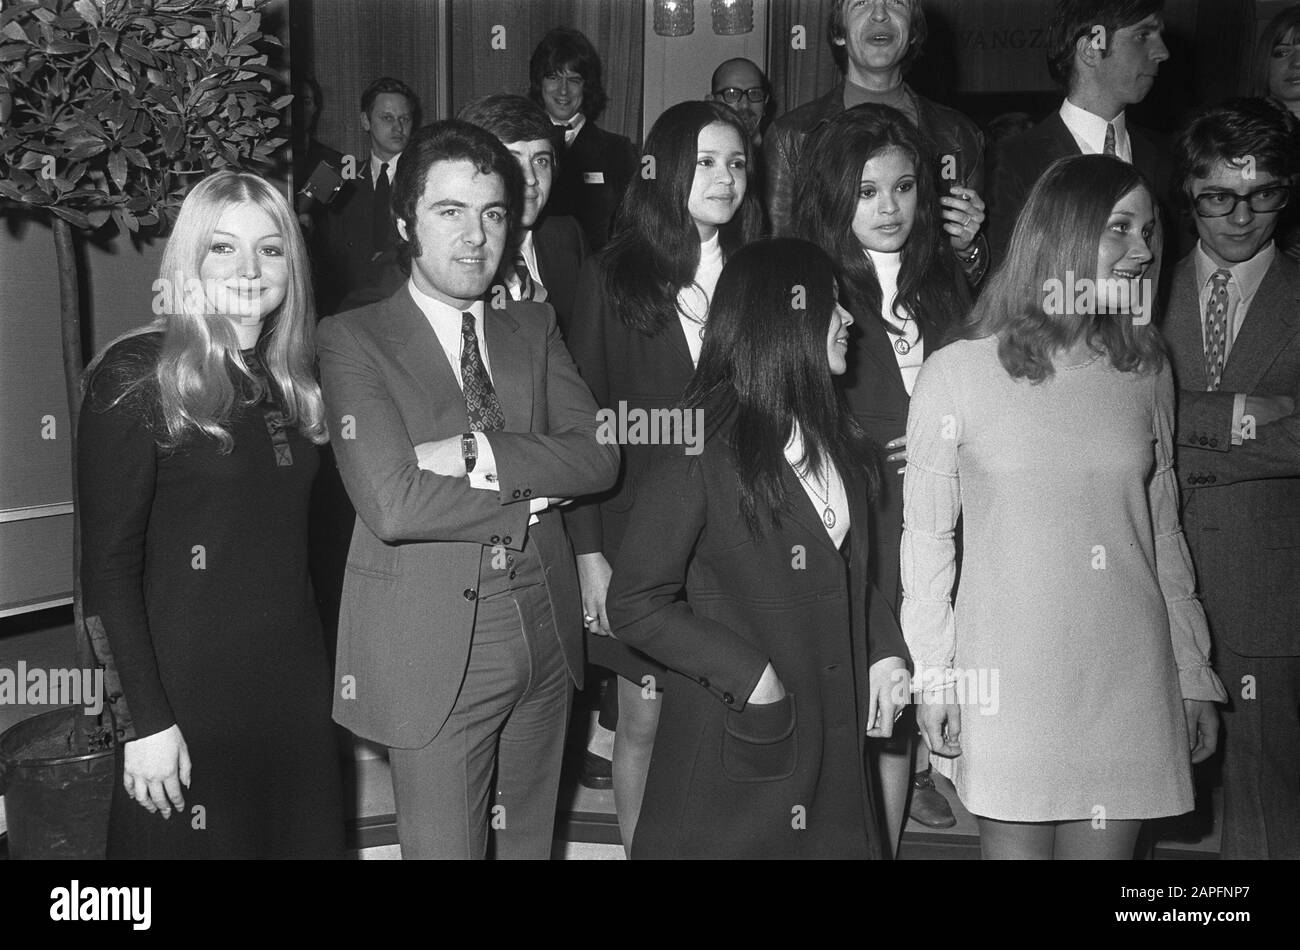 Eurovision Song Contest 1970 in RAI Amsterdam Description: Mayor Samkalden receives participants at Eurovision Song Festival in Hotel Kras in Amsterdam. Some participants Annotation: At first row: Mary Hopkin, David Alexander Winter, Hearts of Soul, Eva Sršen, Guy Bonnet Date: 19 March 1970 Location: Amsterdam, Noord-Holland Keywords: mayors, song festivals Personal name: Hotel Kras Stock Photo